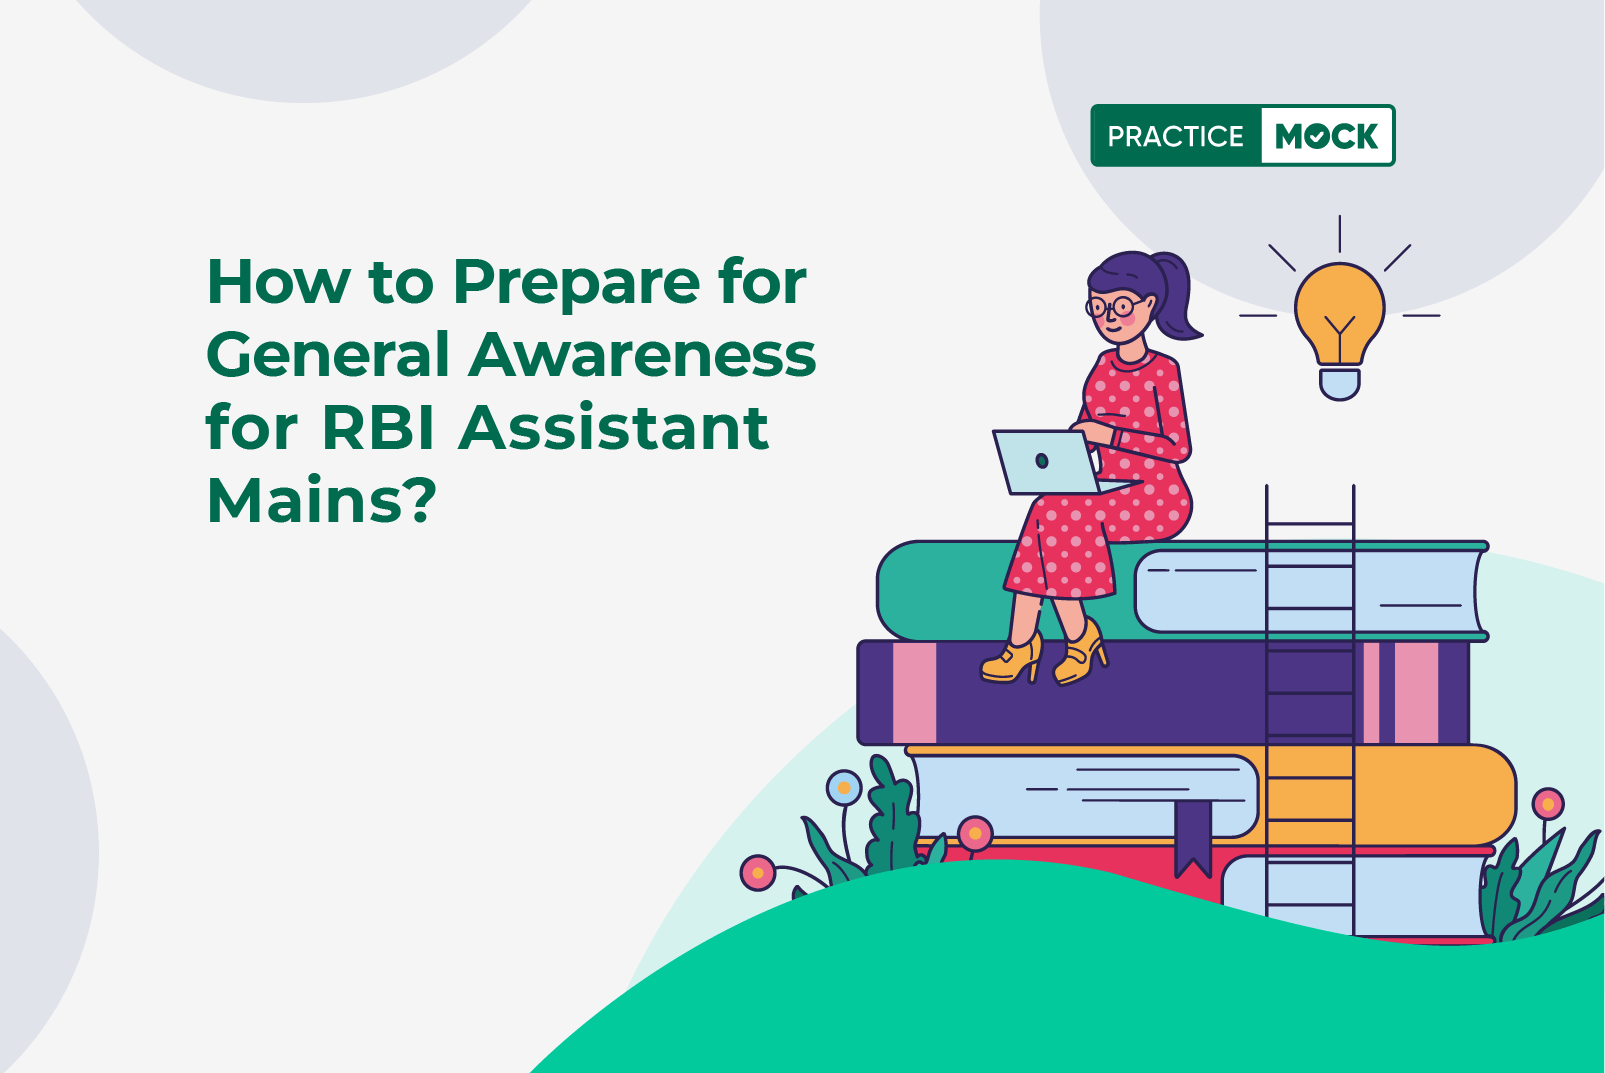 How to Prepare for General Awareness for RBI Assistant Mains